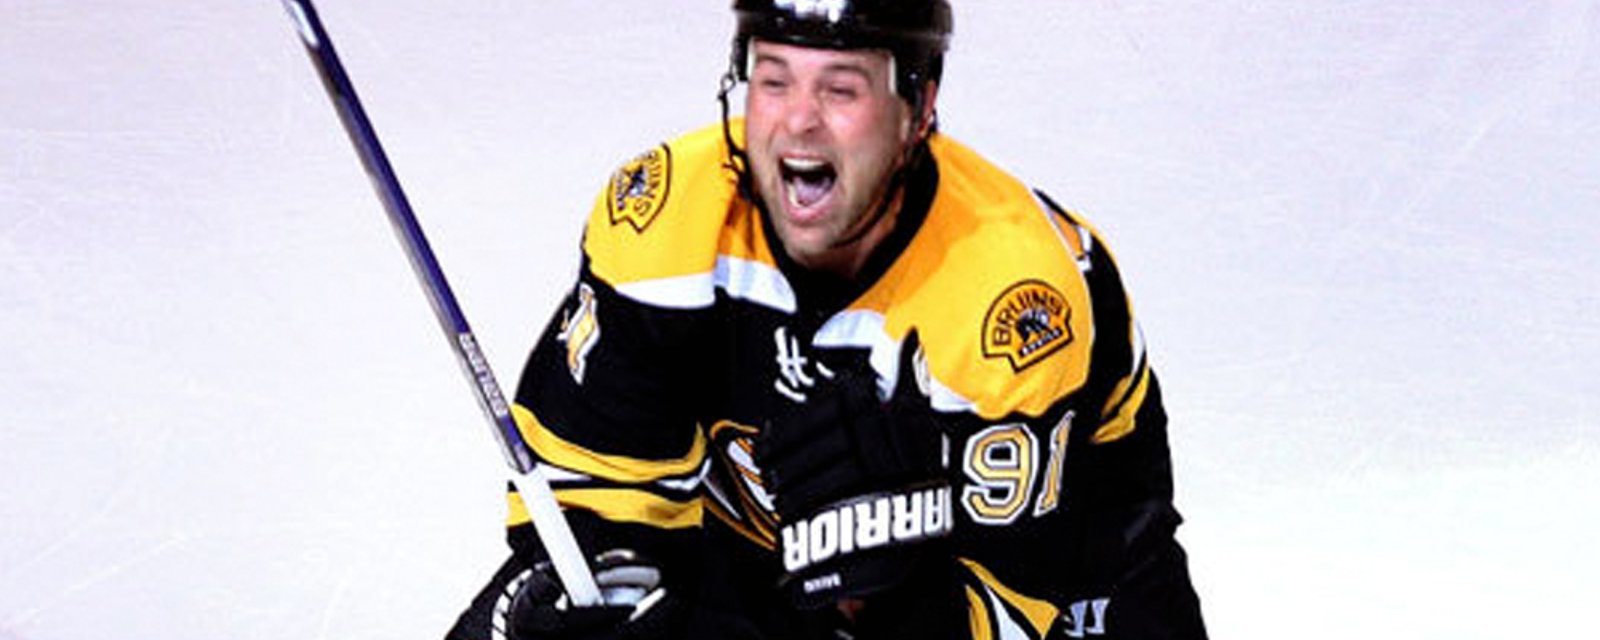 Former NHLer Marc Savard hired for head coaching role in OHL